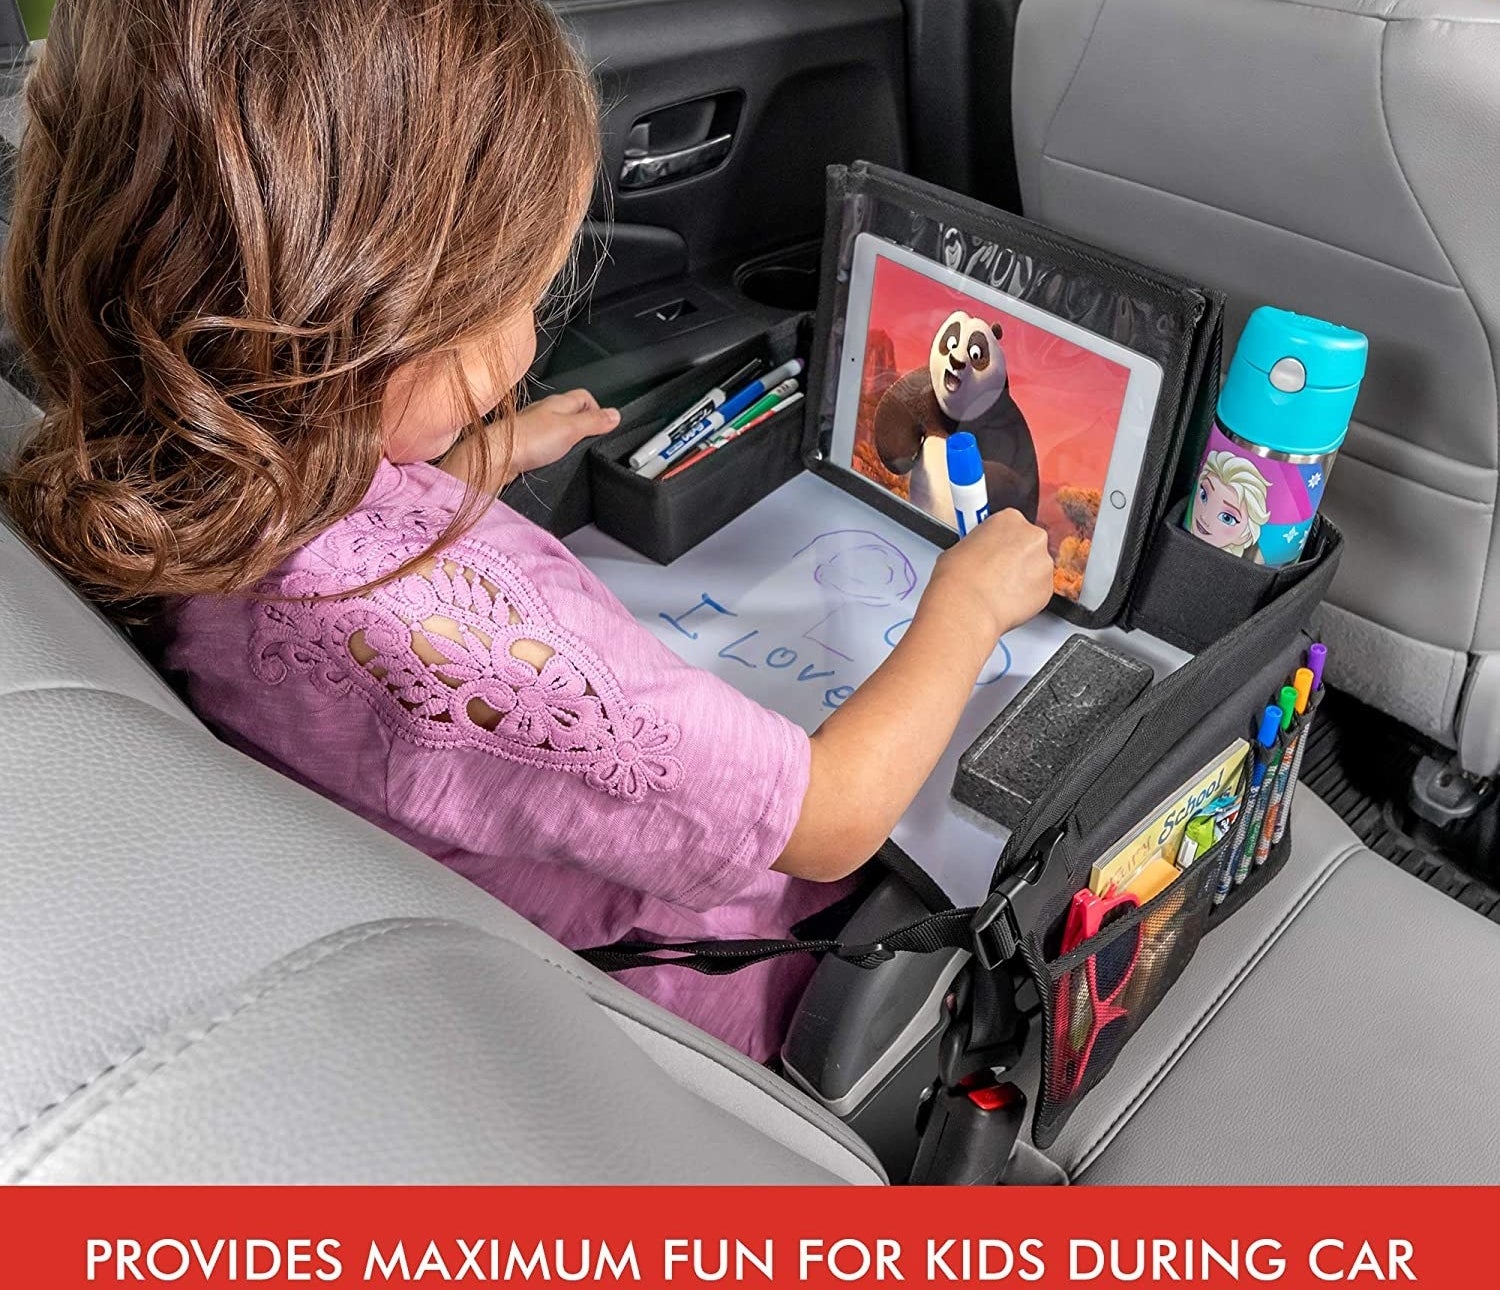 Family-friendly travel accessories: Road trip edition